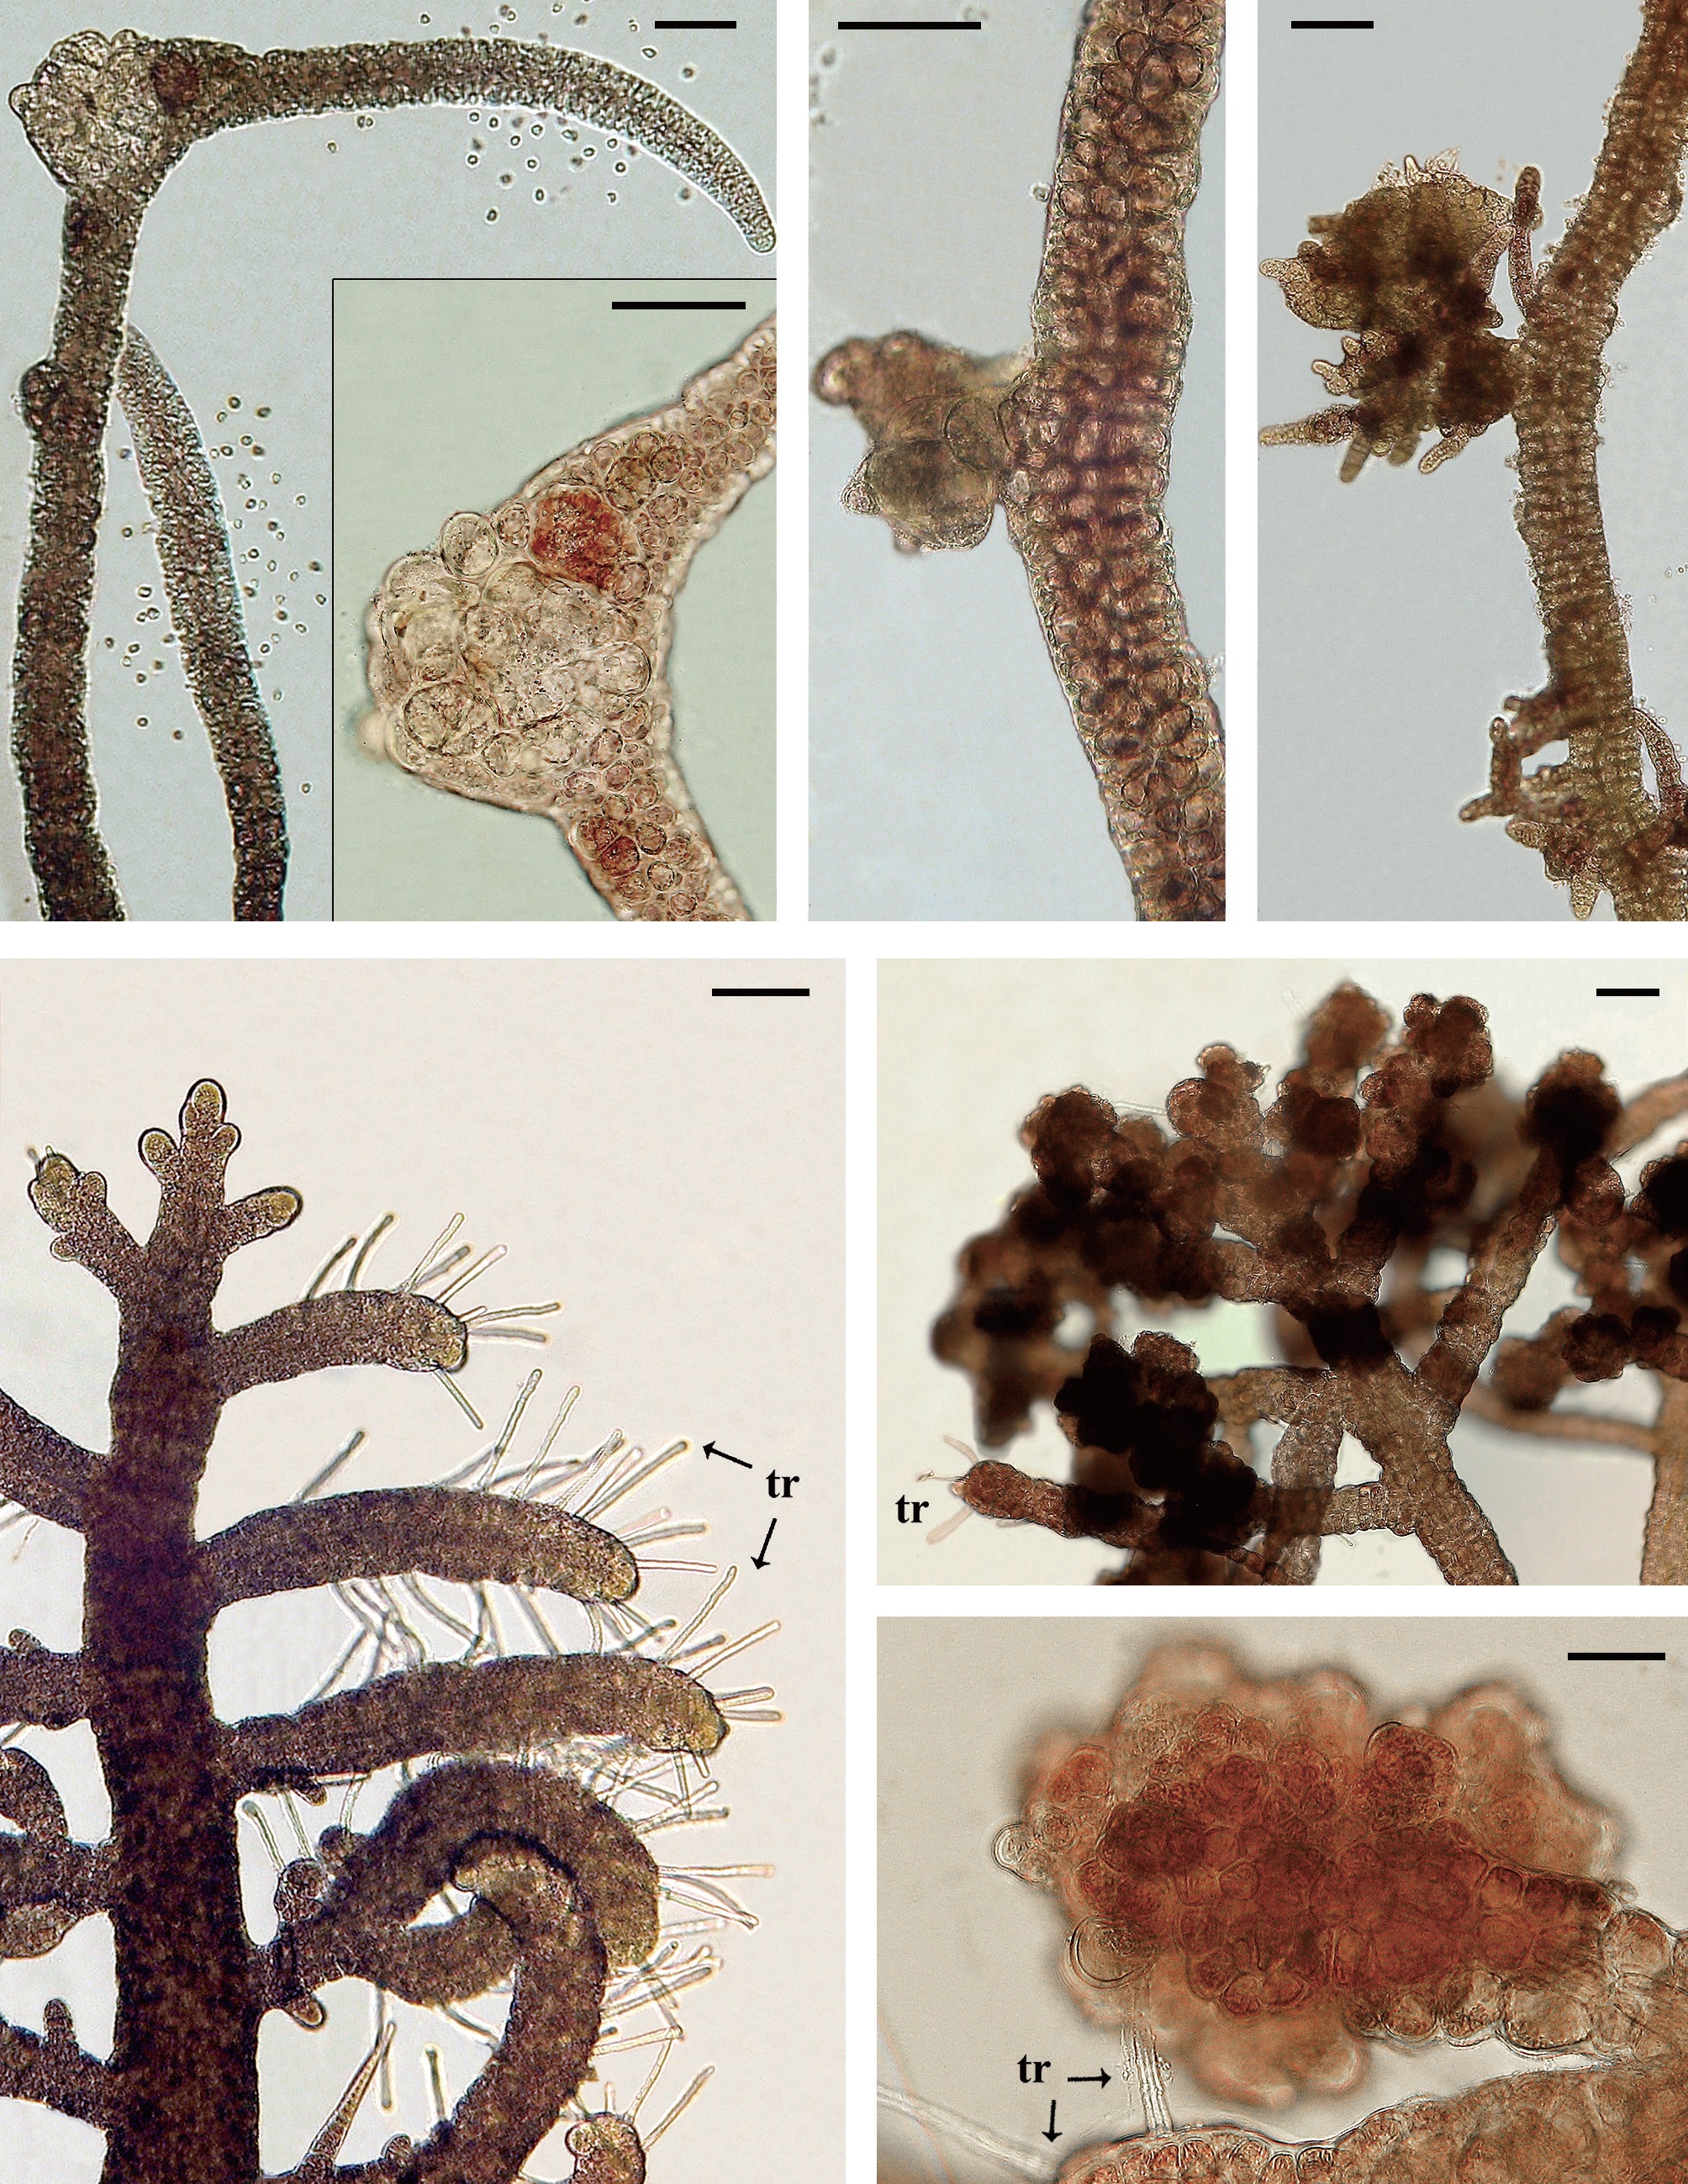 Galls on Bostrychia radicosa, isolate 4178 (A & B); B. kelanensis, isolate 3810 (C & D); B. tenella isolate 2751 (E-G). (A) B. radicosa, elongate spermatangia bearing lateral branches with two galls visible on left. Released spermatia near branch tips also visible, small developing gall with normally pigmented cells visible on far left. (B) B. radicosa, high magnification, enlarged cells lightly pigmented with enlarged vacuoles. (C) B. kelanensis, developing gall with normally pigmented cells projecting from branch. (D) B. kelanensis, older galls with extensive branch formation. (E) B. tenella, normal procarpic branches with abundant trichogynes (tr). (F) B. tenella, numerous galls on procarpic branches, trichogynes (tr). (G) B. tenella, high magnification of gall cells, tier and cortical cells with fully pigmented chloroplasts, trichogynes (tr). Scale bars represent: A & B, 50 μm; C & D, 77 μm; E & F, 100 μm; G, 25 μm.